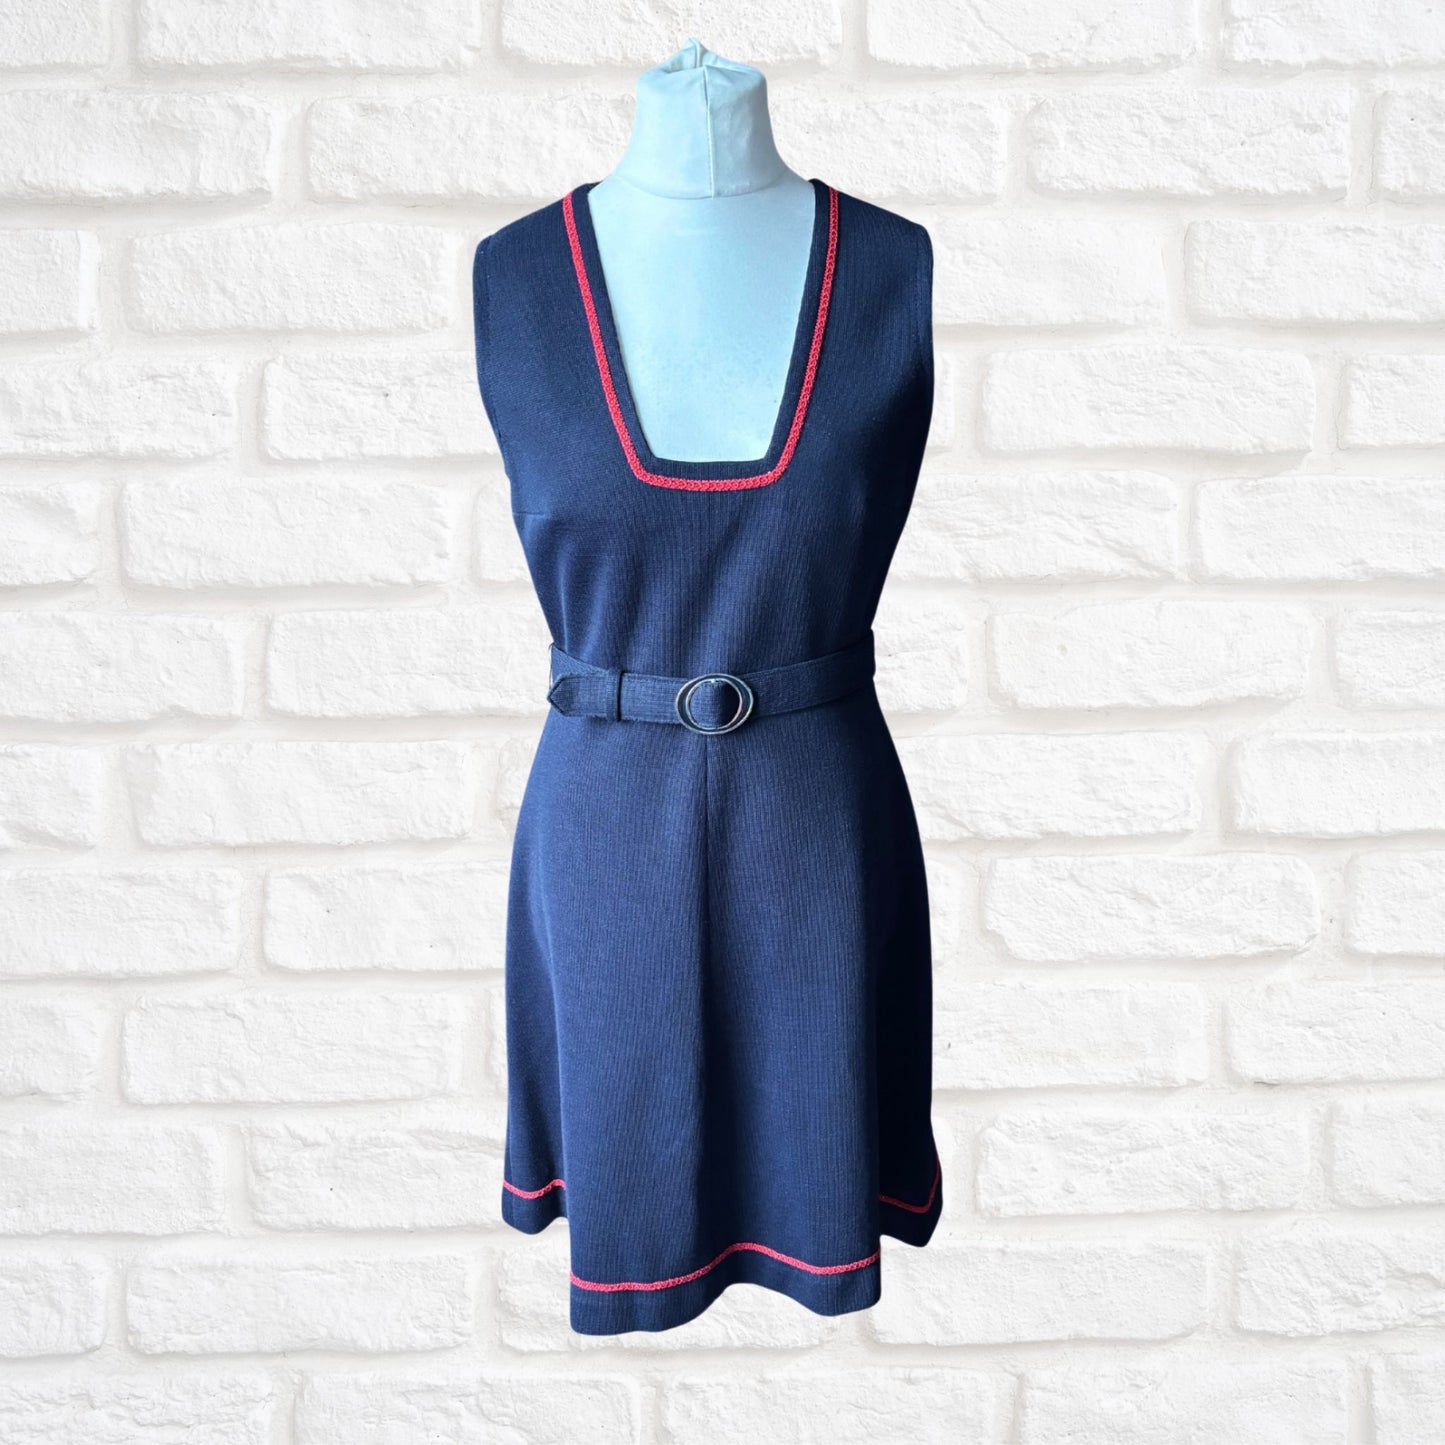 60s navy blue pinafore dress with red brocade trim and matching belt. Approx UK size 12-14